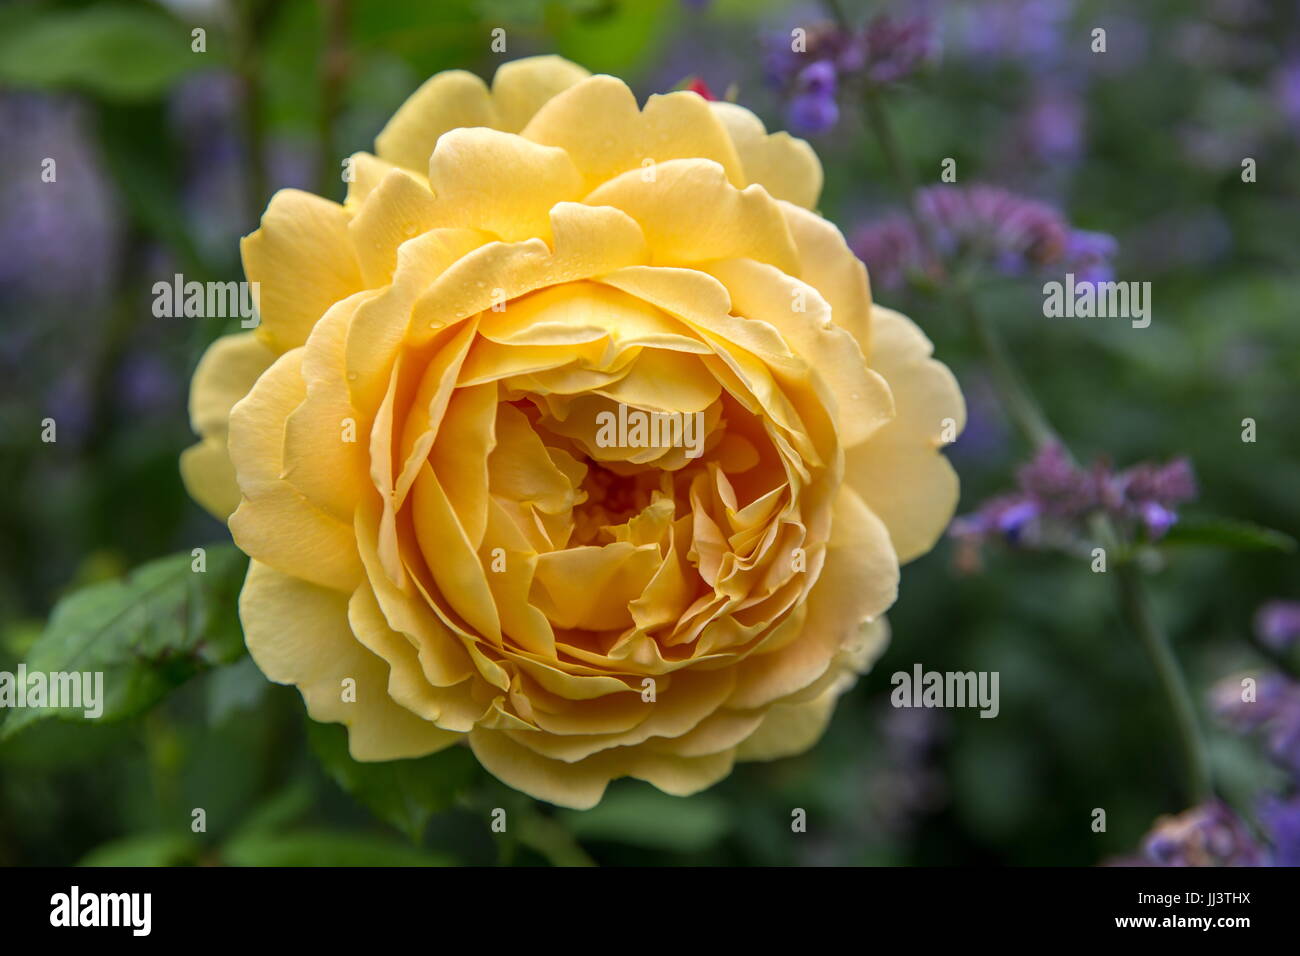 Blooming yellow English rose in the garden on a sunny day. Rose 'Golden Celebration' Stock Photo